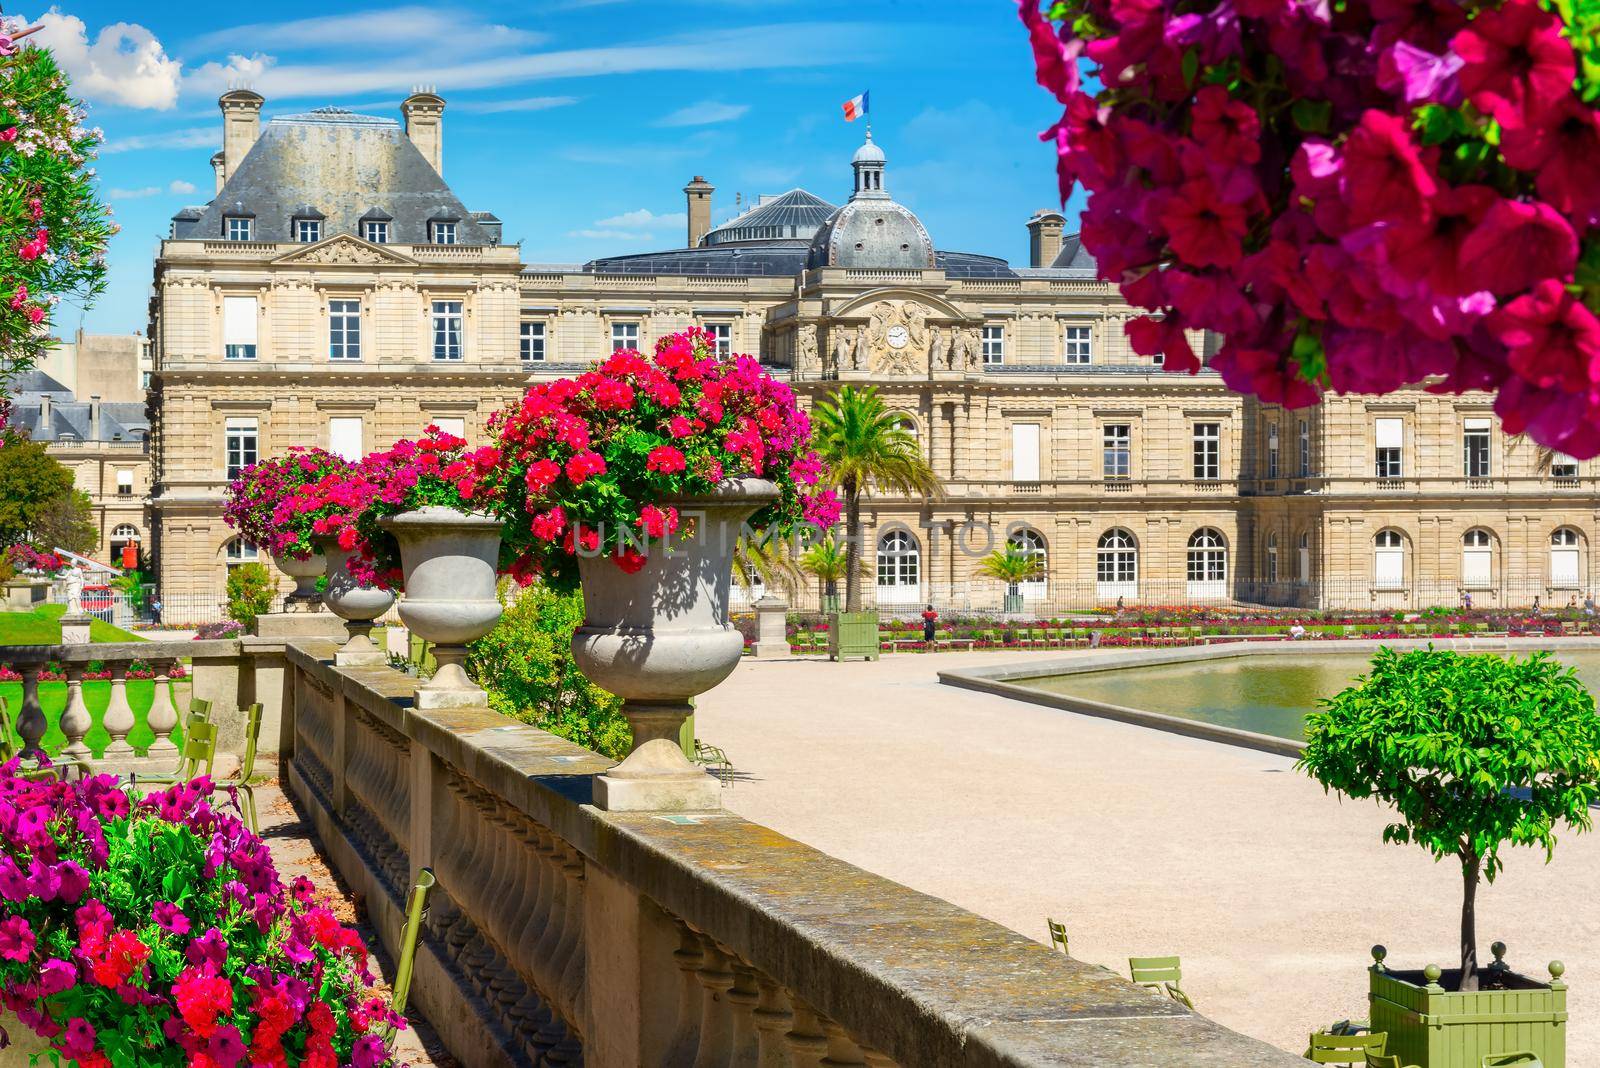 Luxembourg Palace and flower beds in summer, Paris